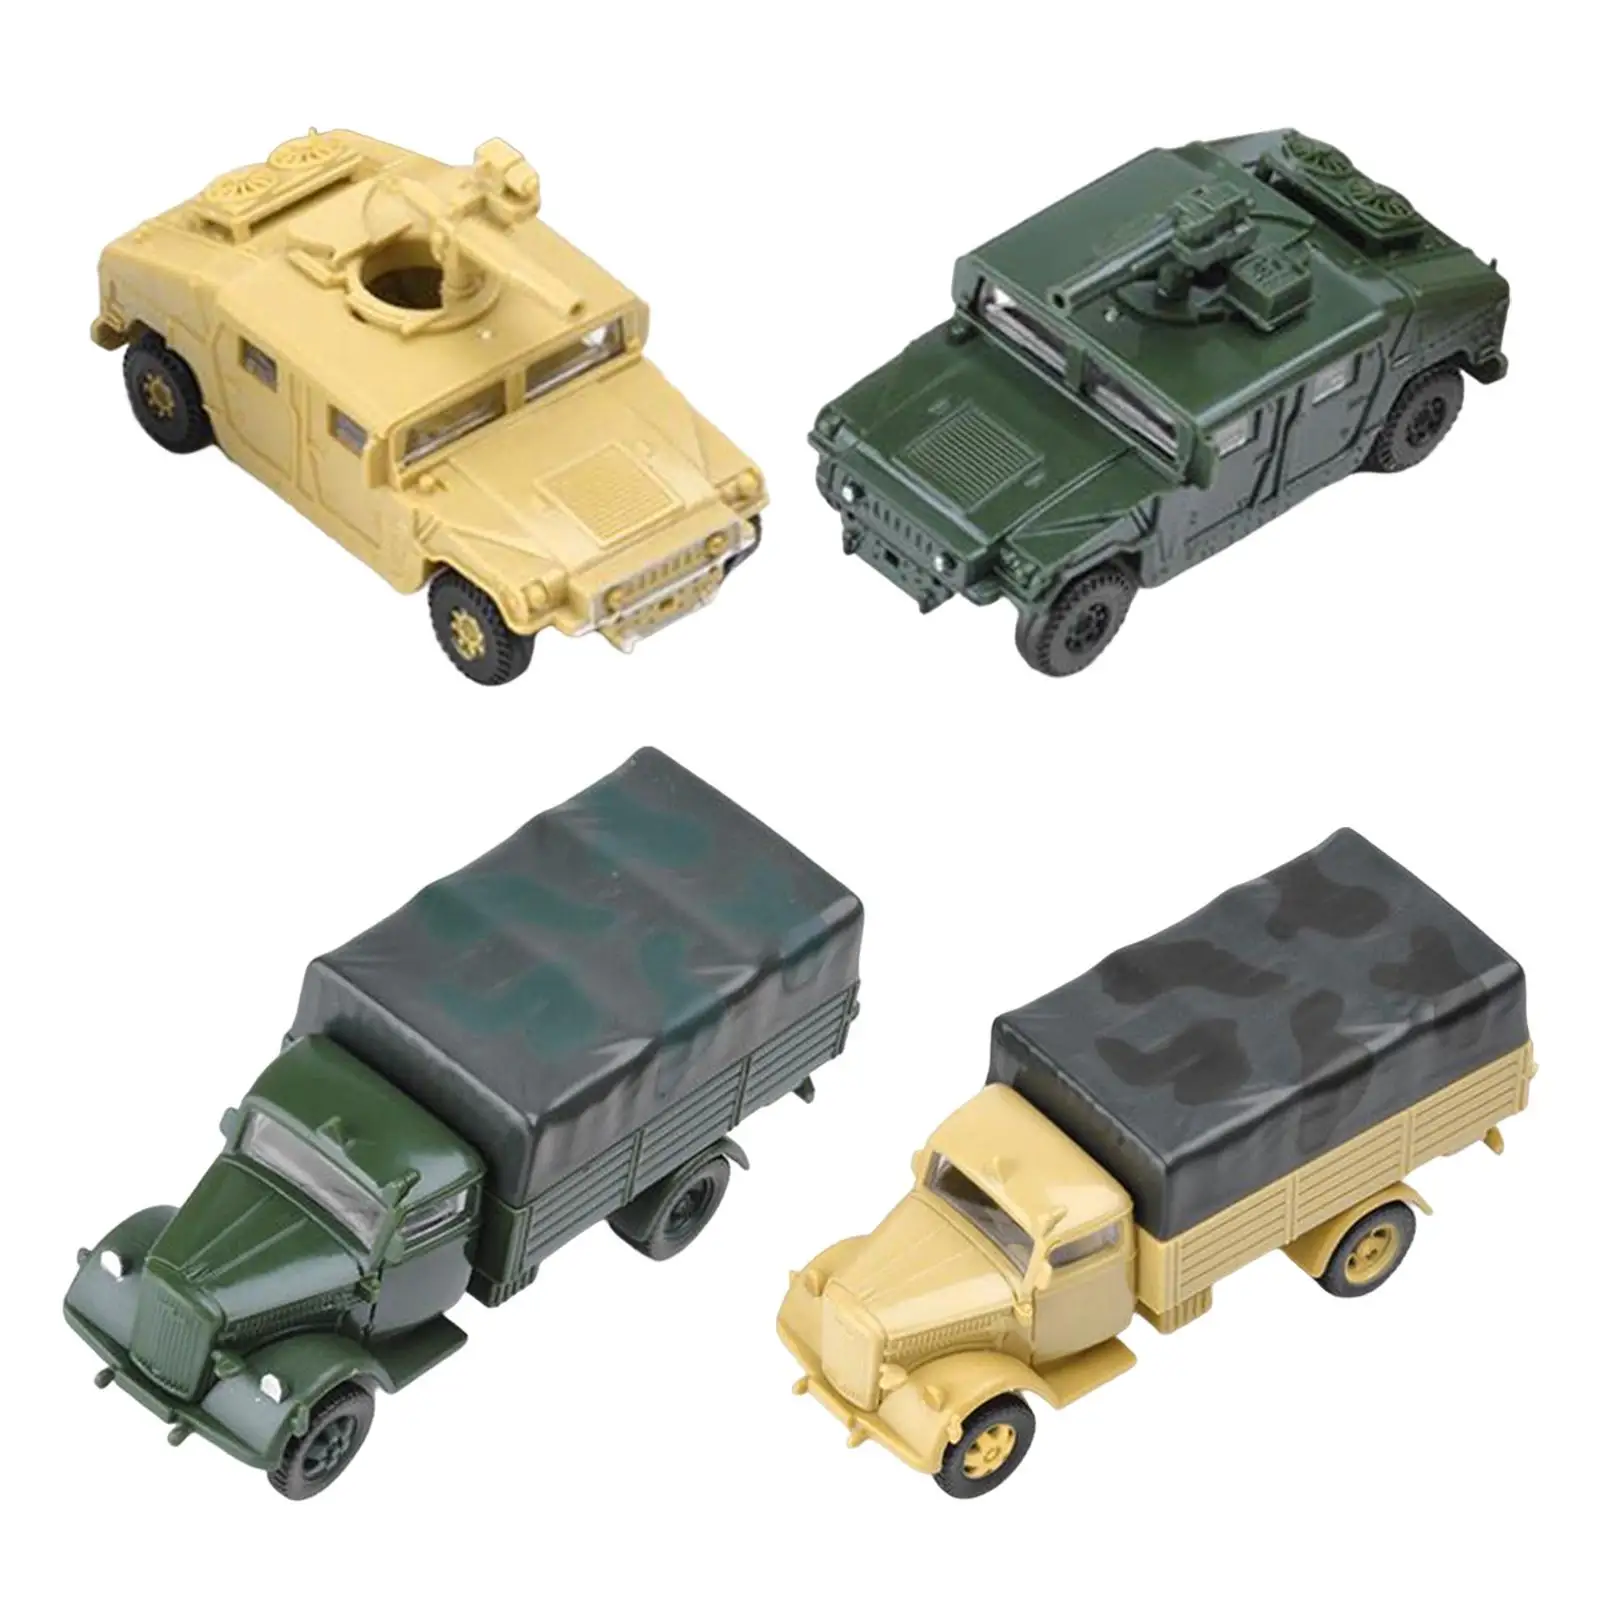 2 Pieces 1/72 Vehicle Model Kits for Collection Tabletop Decor Keepsake